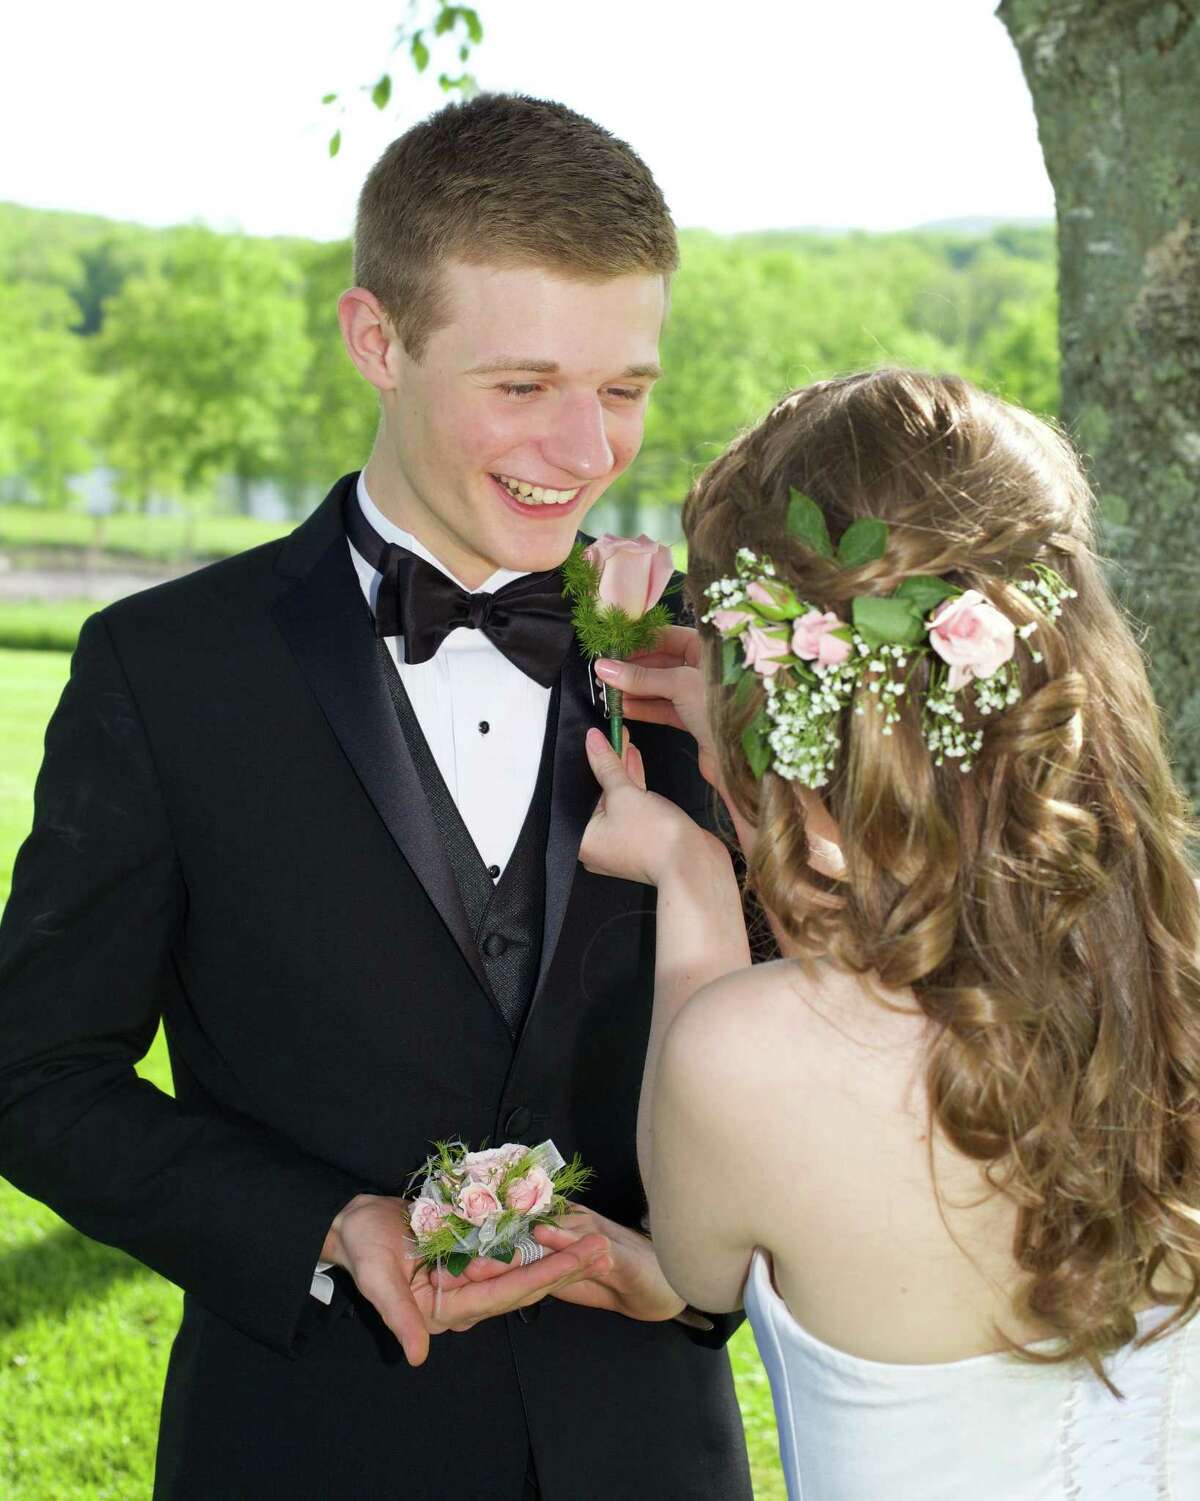 New Milford High School senior Kay Mickelson pins a boutonniere on her escort, sophomore Connor Caridad, before heading to the senior prom held at the Amber Room in Danbury.